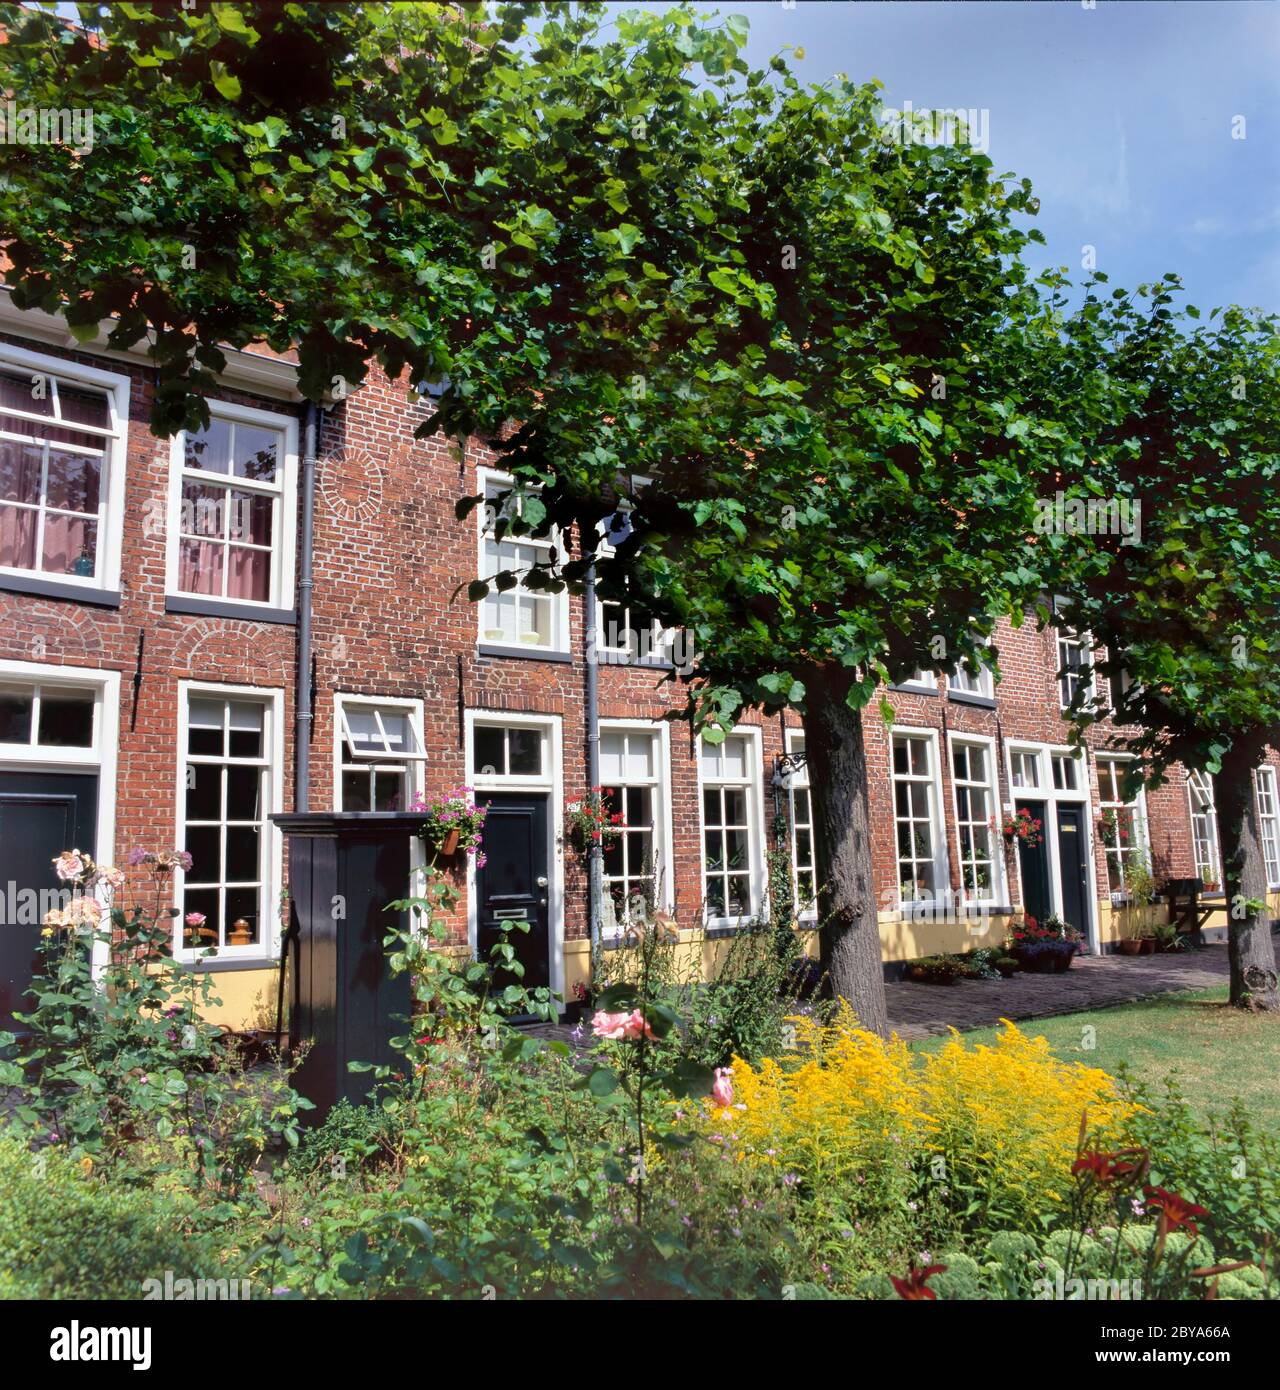 Sint Anthony Gasthuis (Saint Antony's Hofje = courtyard with Almshouses), inner city of Groningen, Netherlands. Founded in 1517 Stock Photo